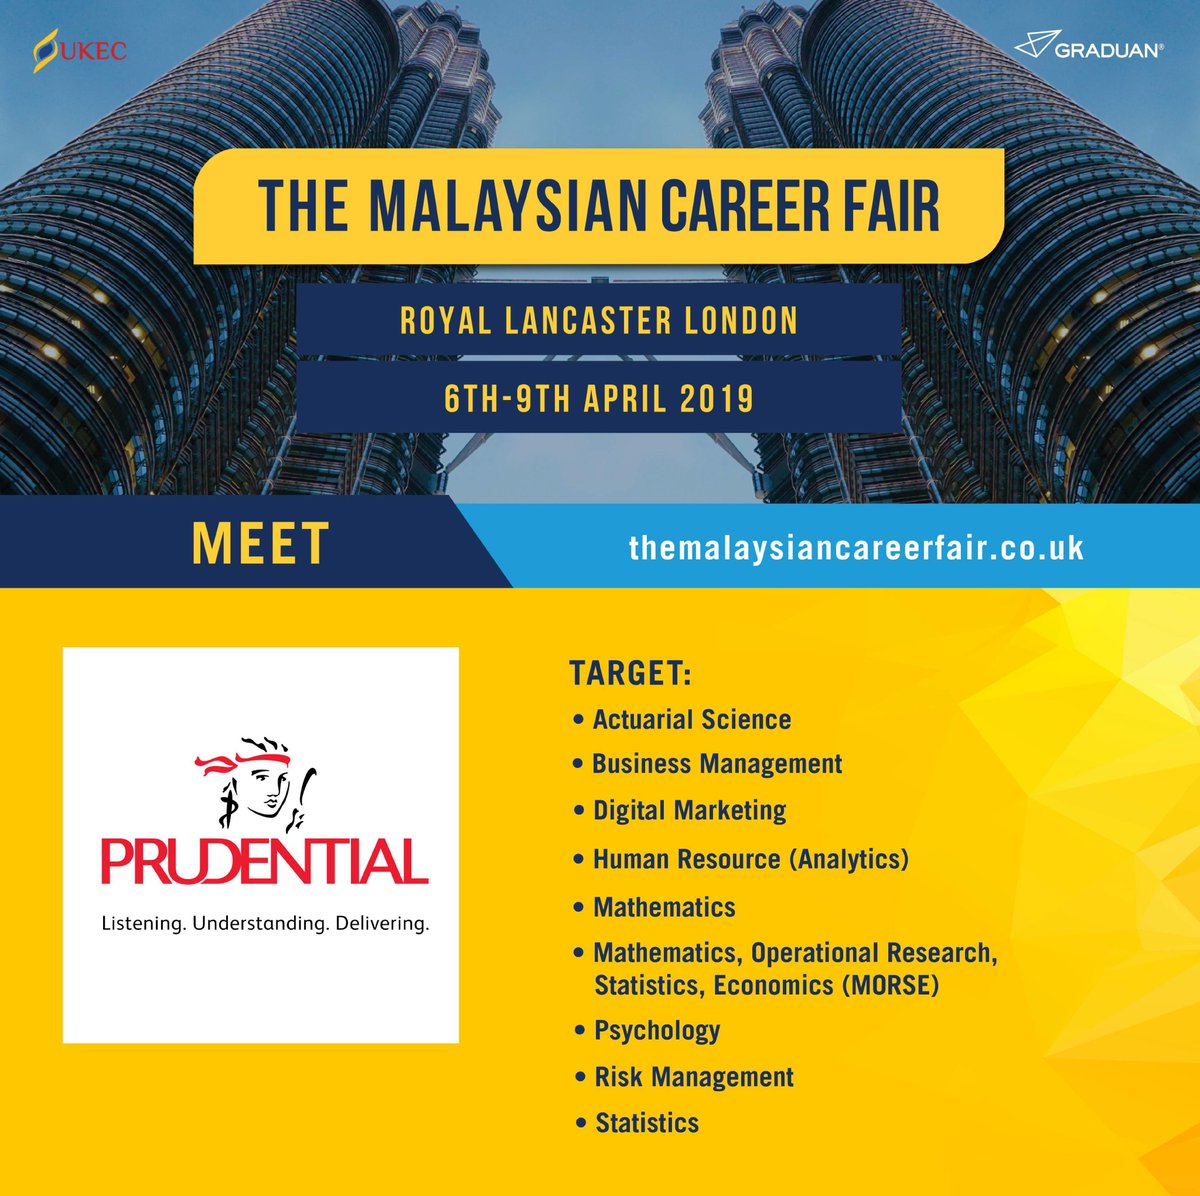 Ukec On Twitter Shell Is Coming To Ukec Graduan The Malaysian Career Fair 2019 To Meet You At Shell You Shape Your Own Career Submit Your Cv Now At Https T Co Sscgistw2t Https T Co Ydez7b6nbd